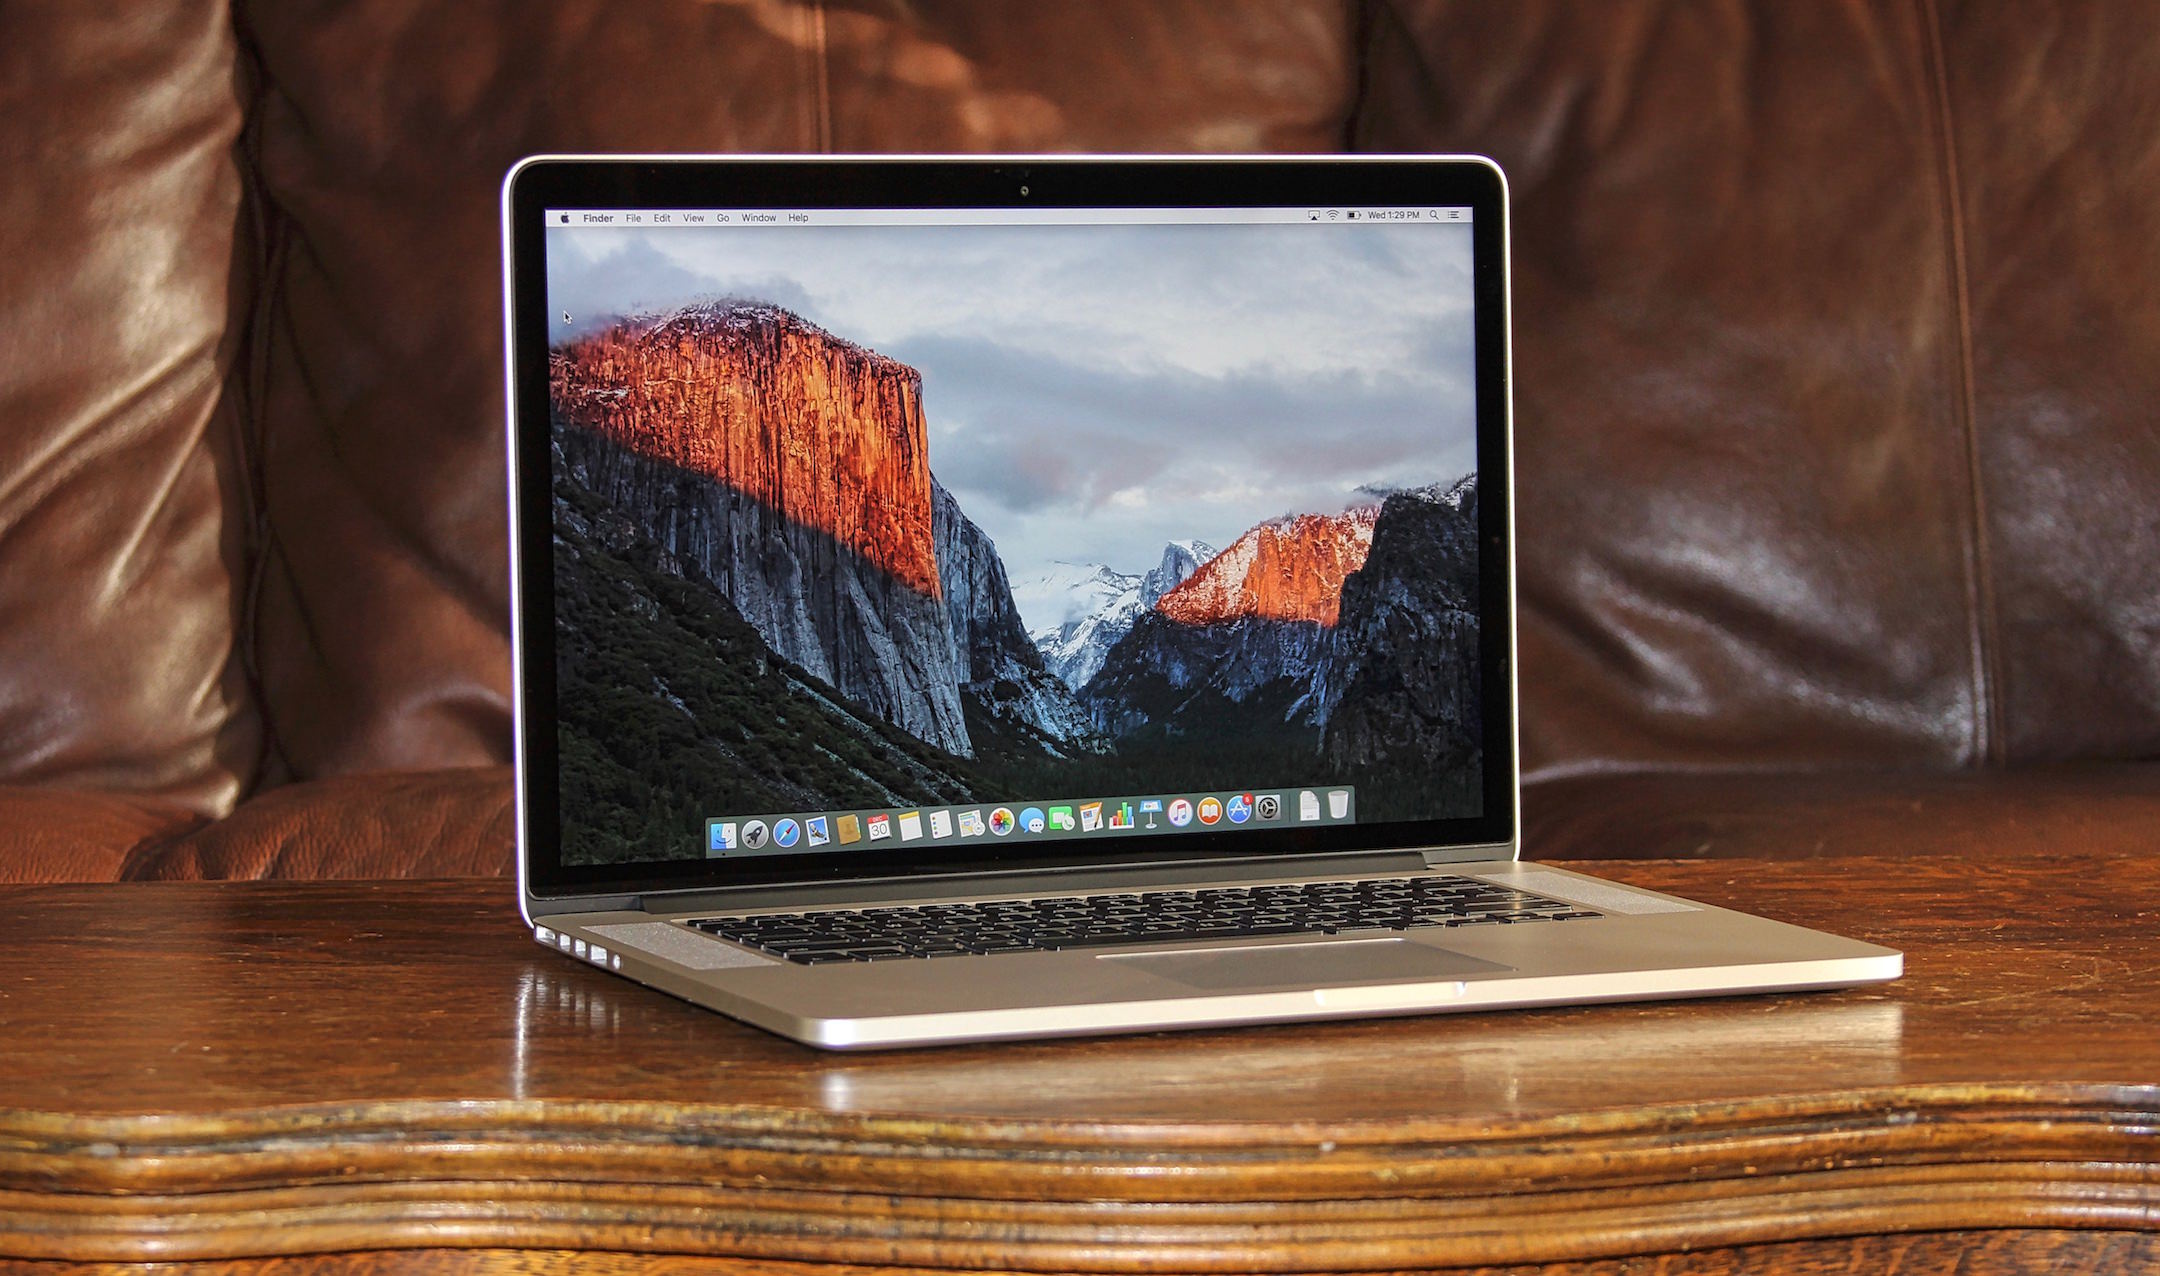 Apple macbook pro 15 inch with retina display review iron maiden somewhere in time